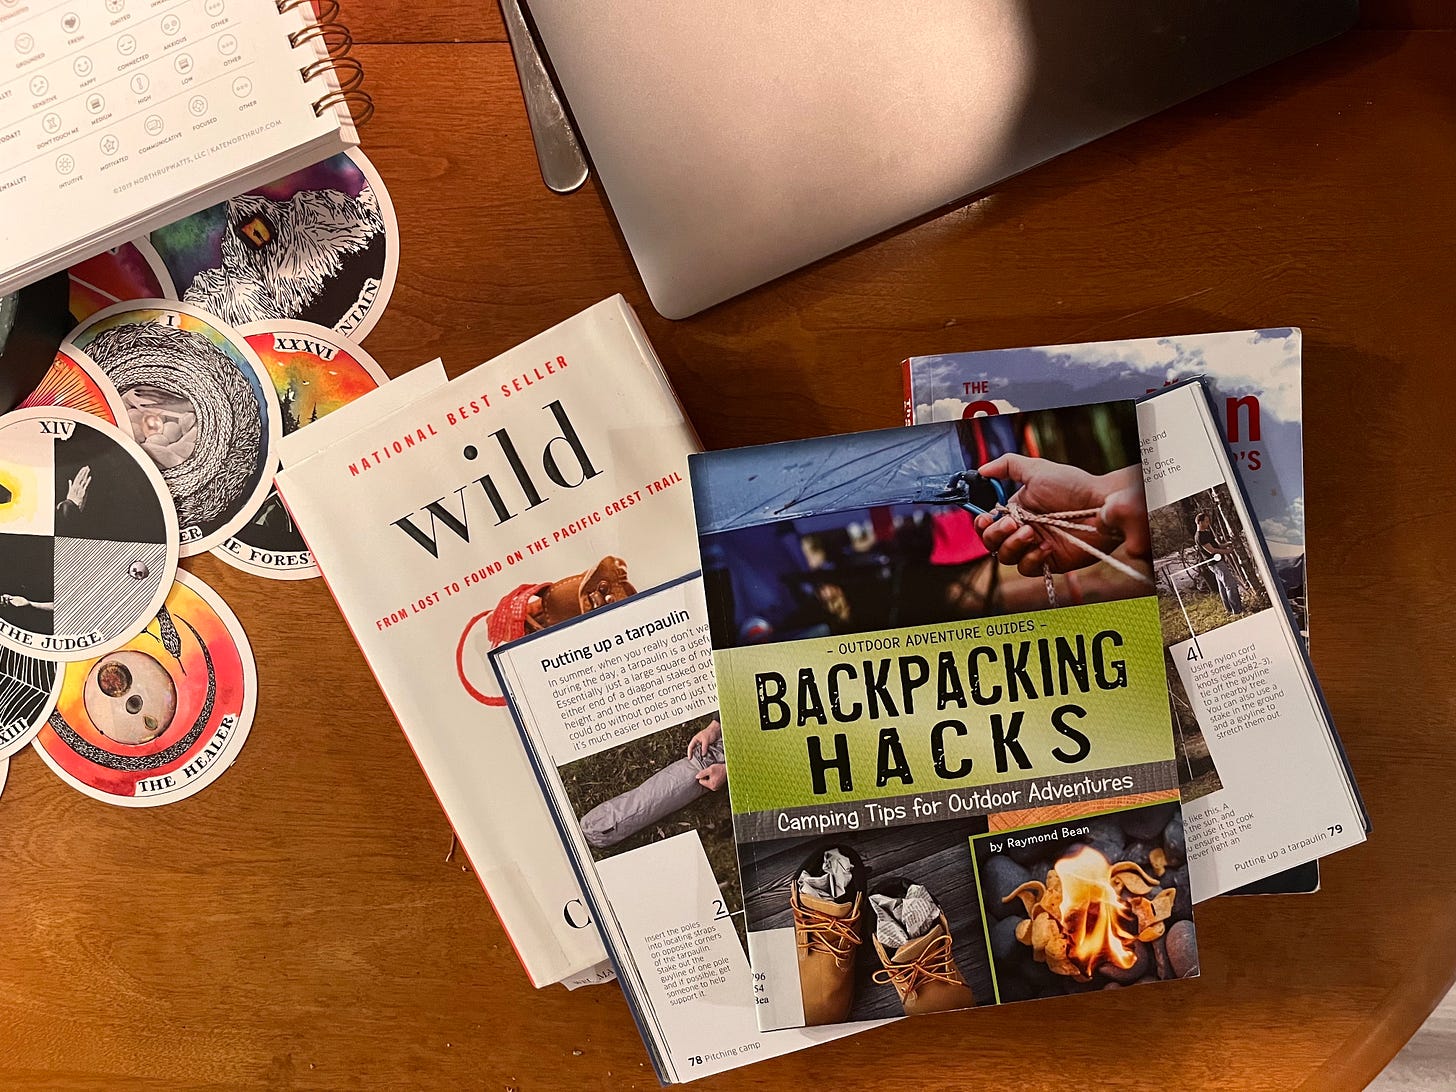 a stack of books about camping including a childens book called "backpacking backs"